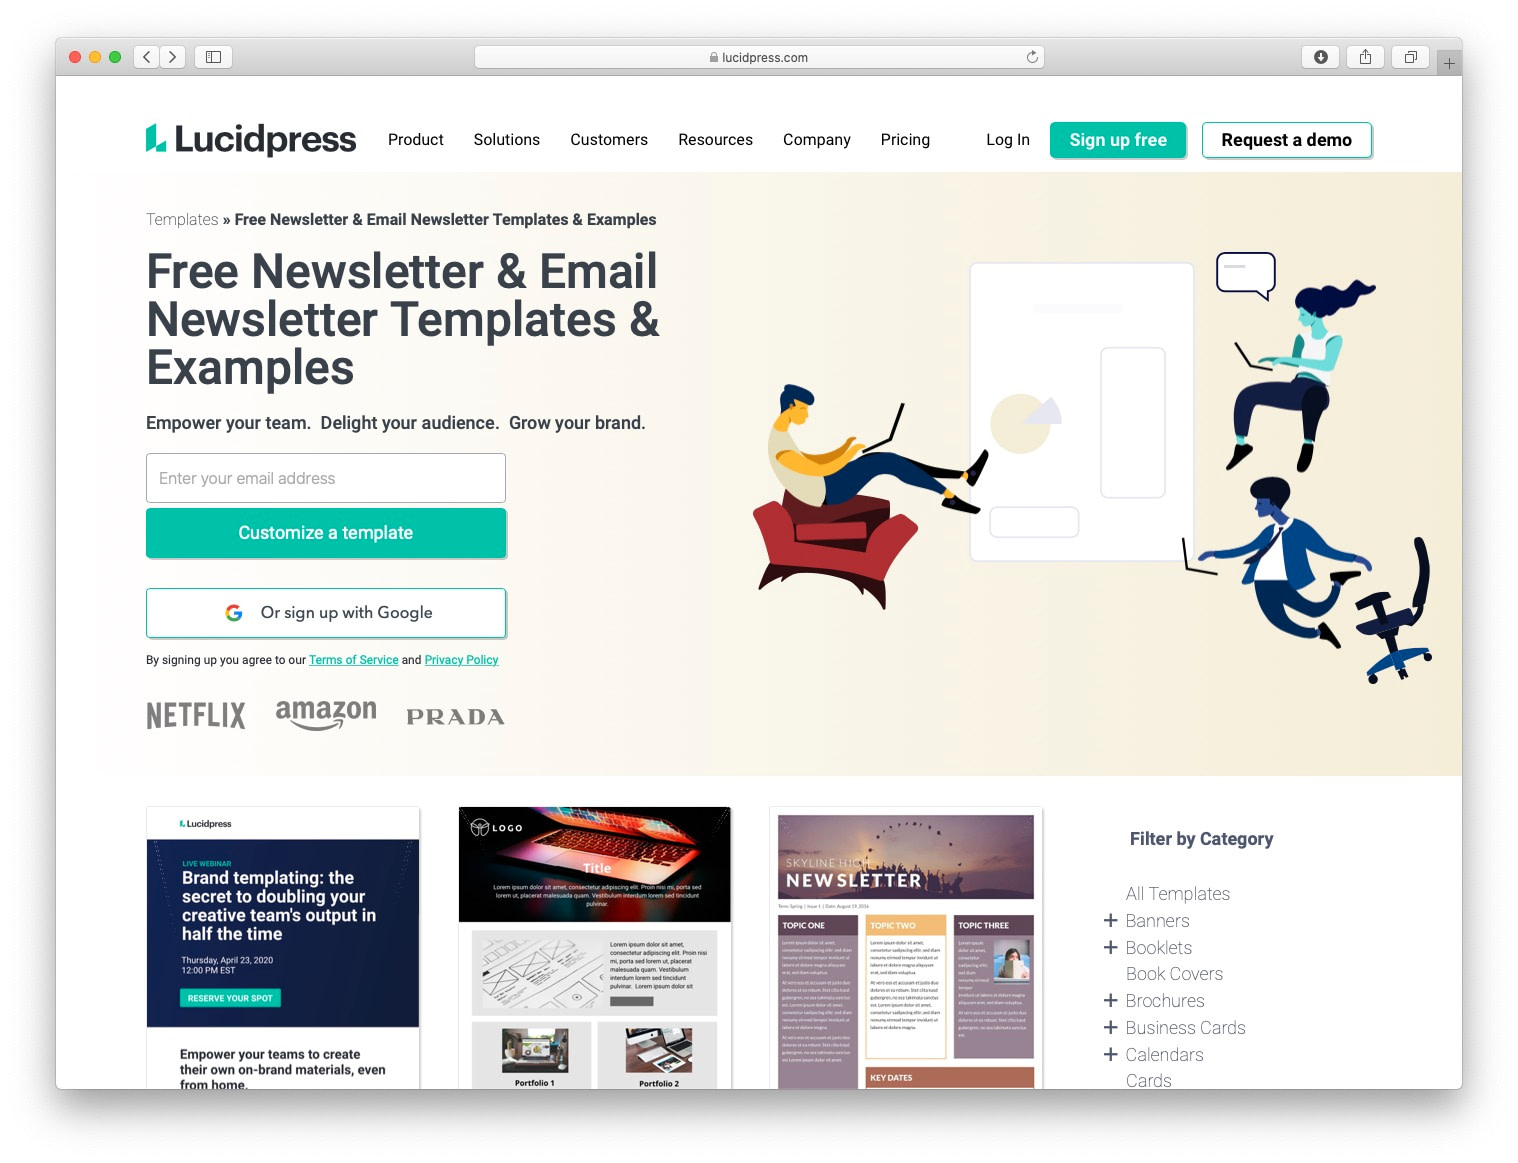 Free email newsletter templates: lucidpress